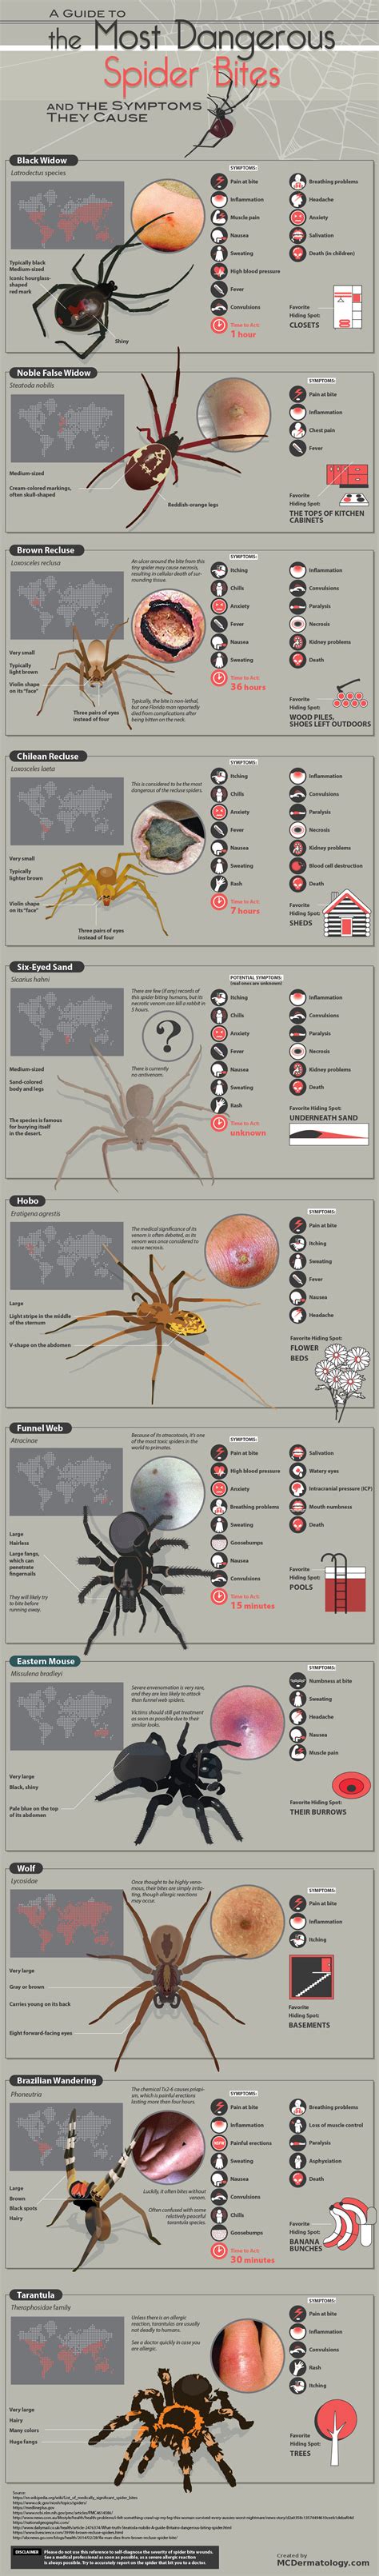 A Guide To The Most Dangerous Spider Bites And The Symptoms They Cause